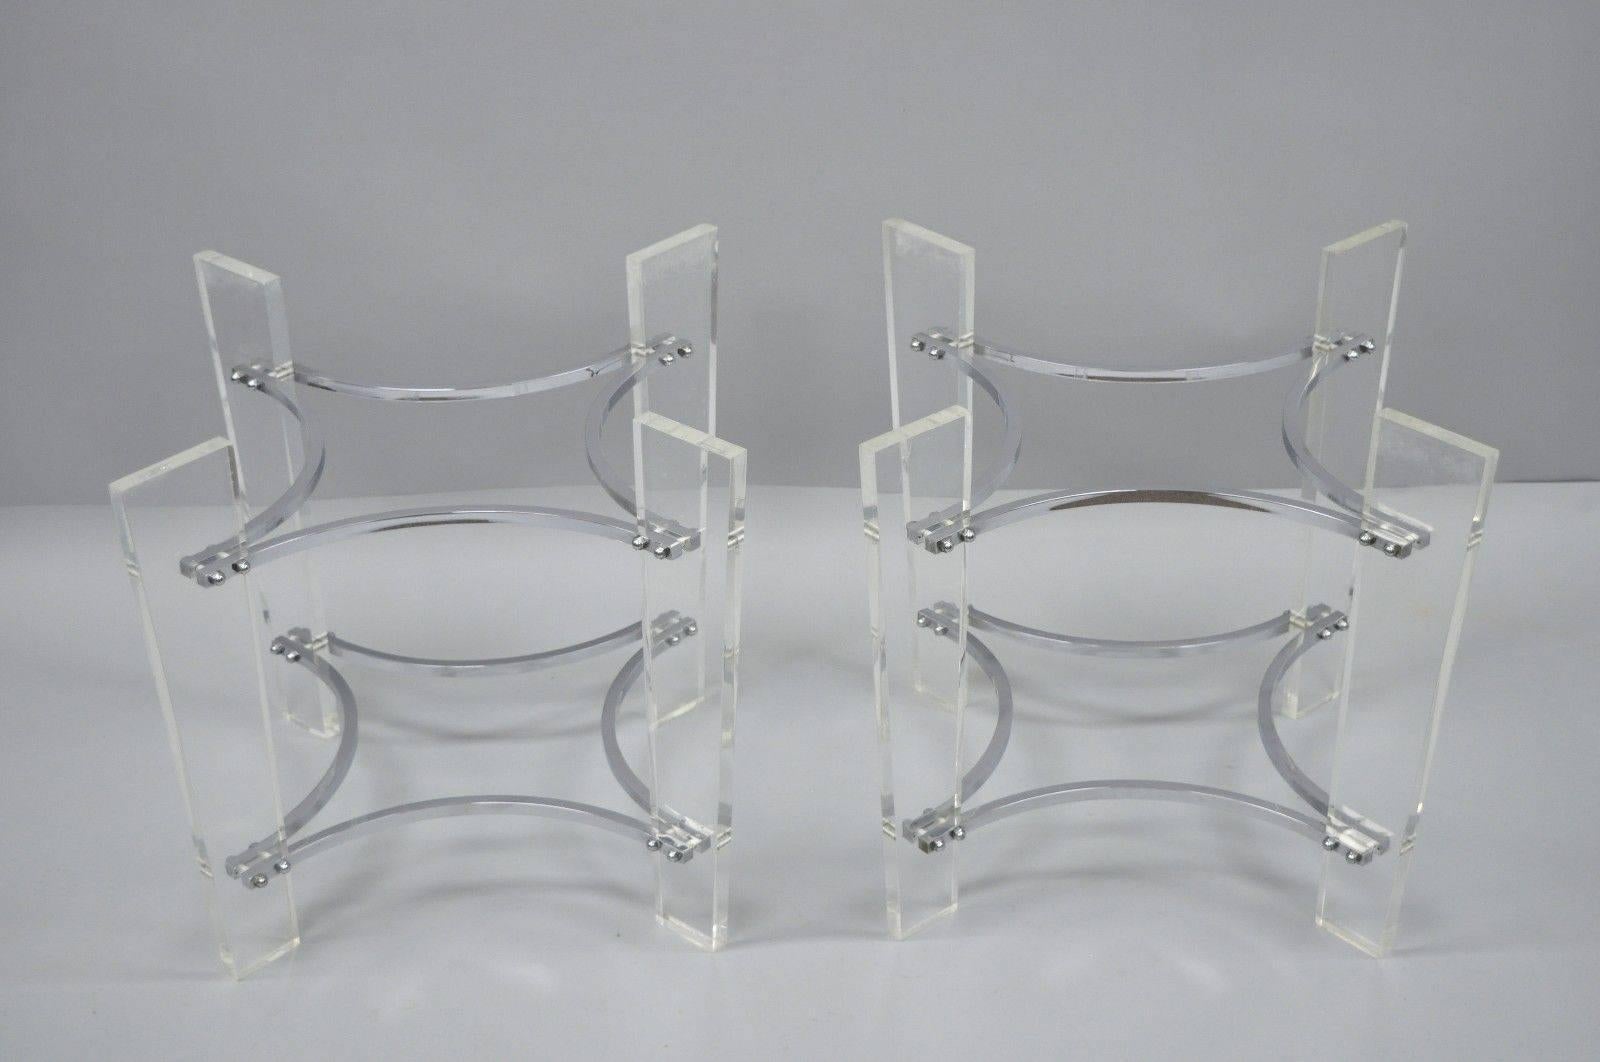 Pair of vintage Lucite and chrome sculptural Mid-Century Modern end table bases (No Tops). Item features angled Lucite legs, chrome star form supports, sleek sculptural style, bases only, no tops. Age, circa 1960s. Measurements: 20